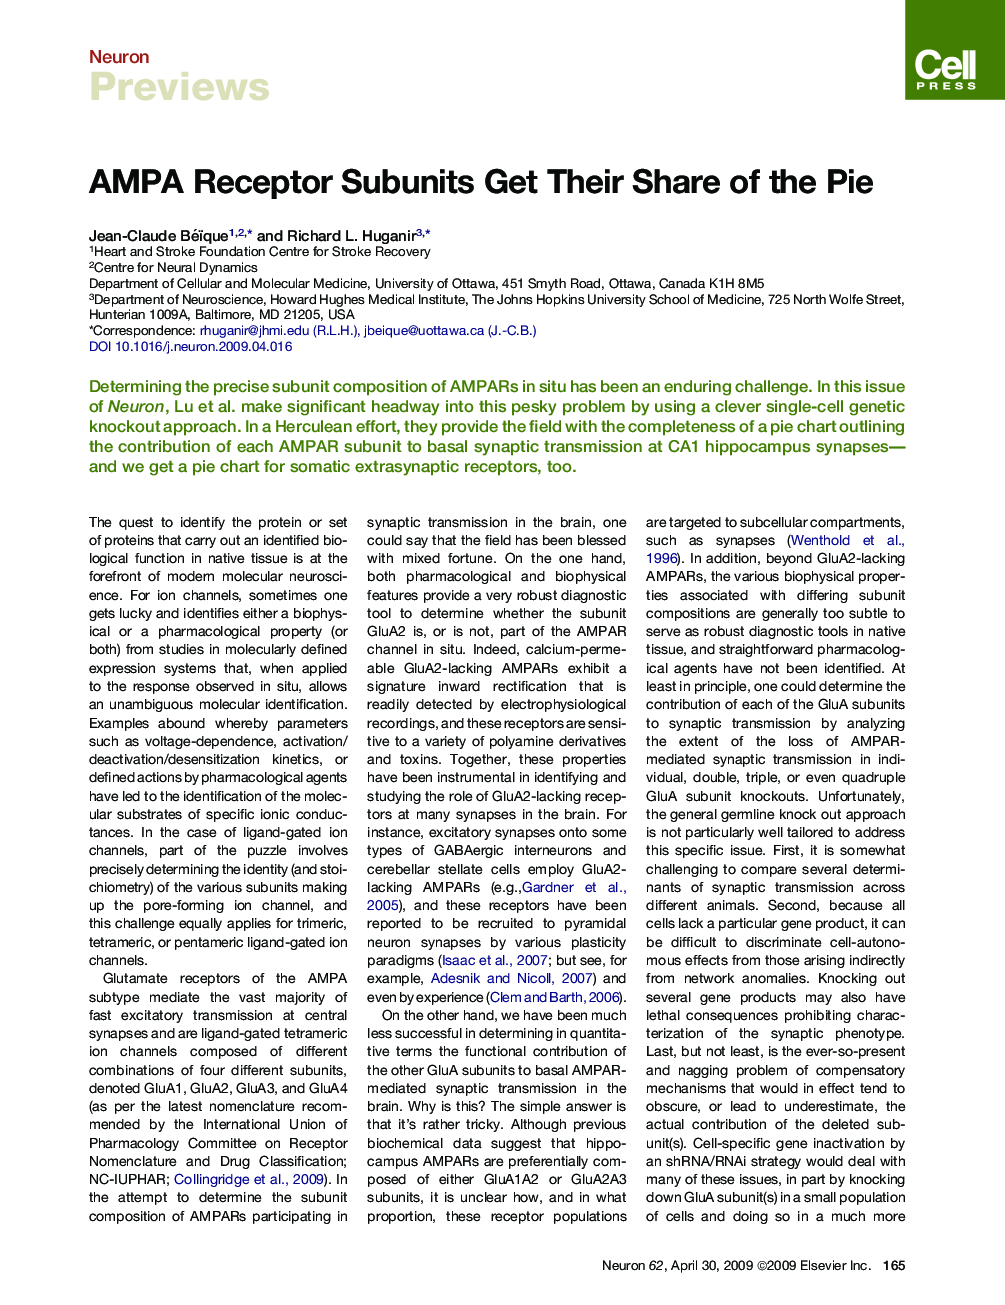 AMPA Receptor Subunits Get Their Share of the Pie